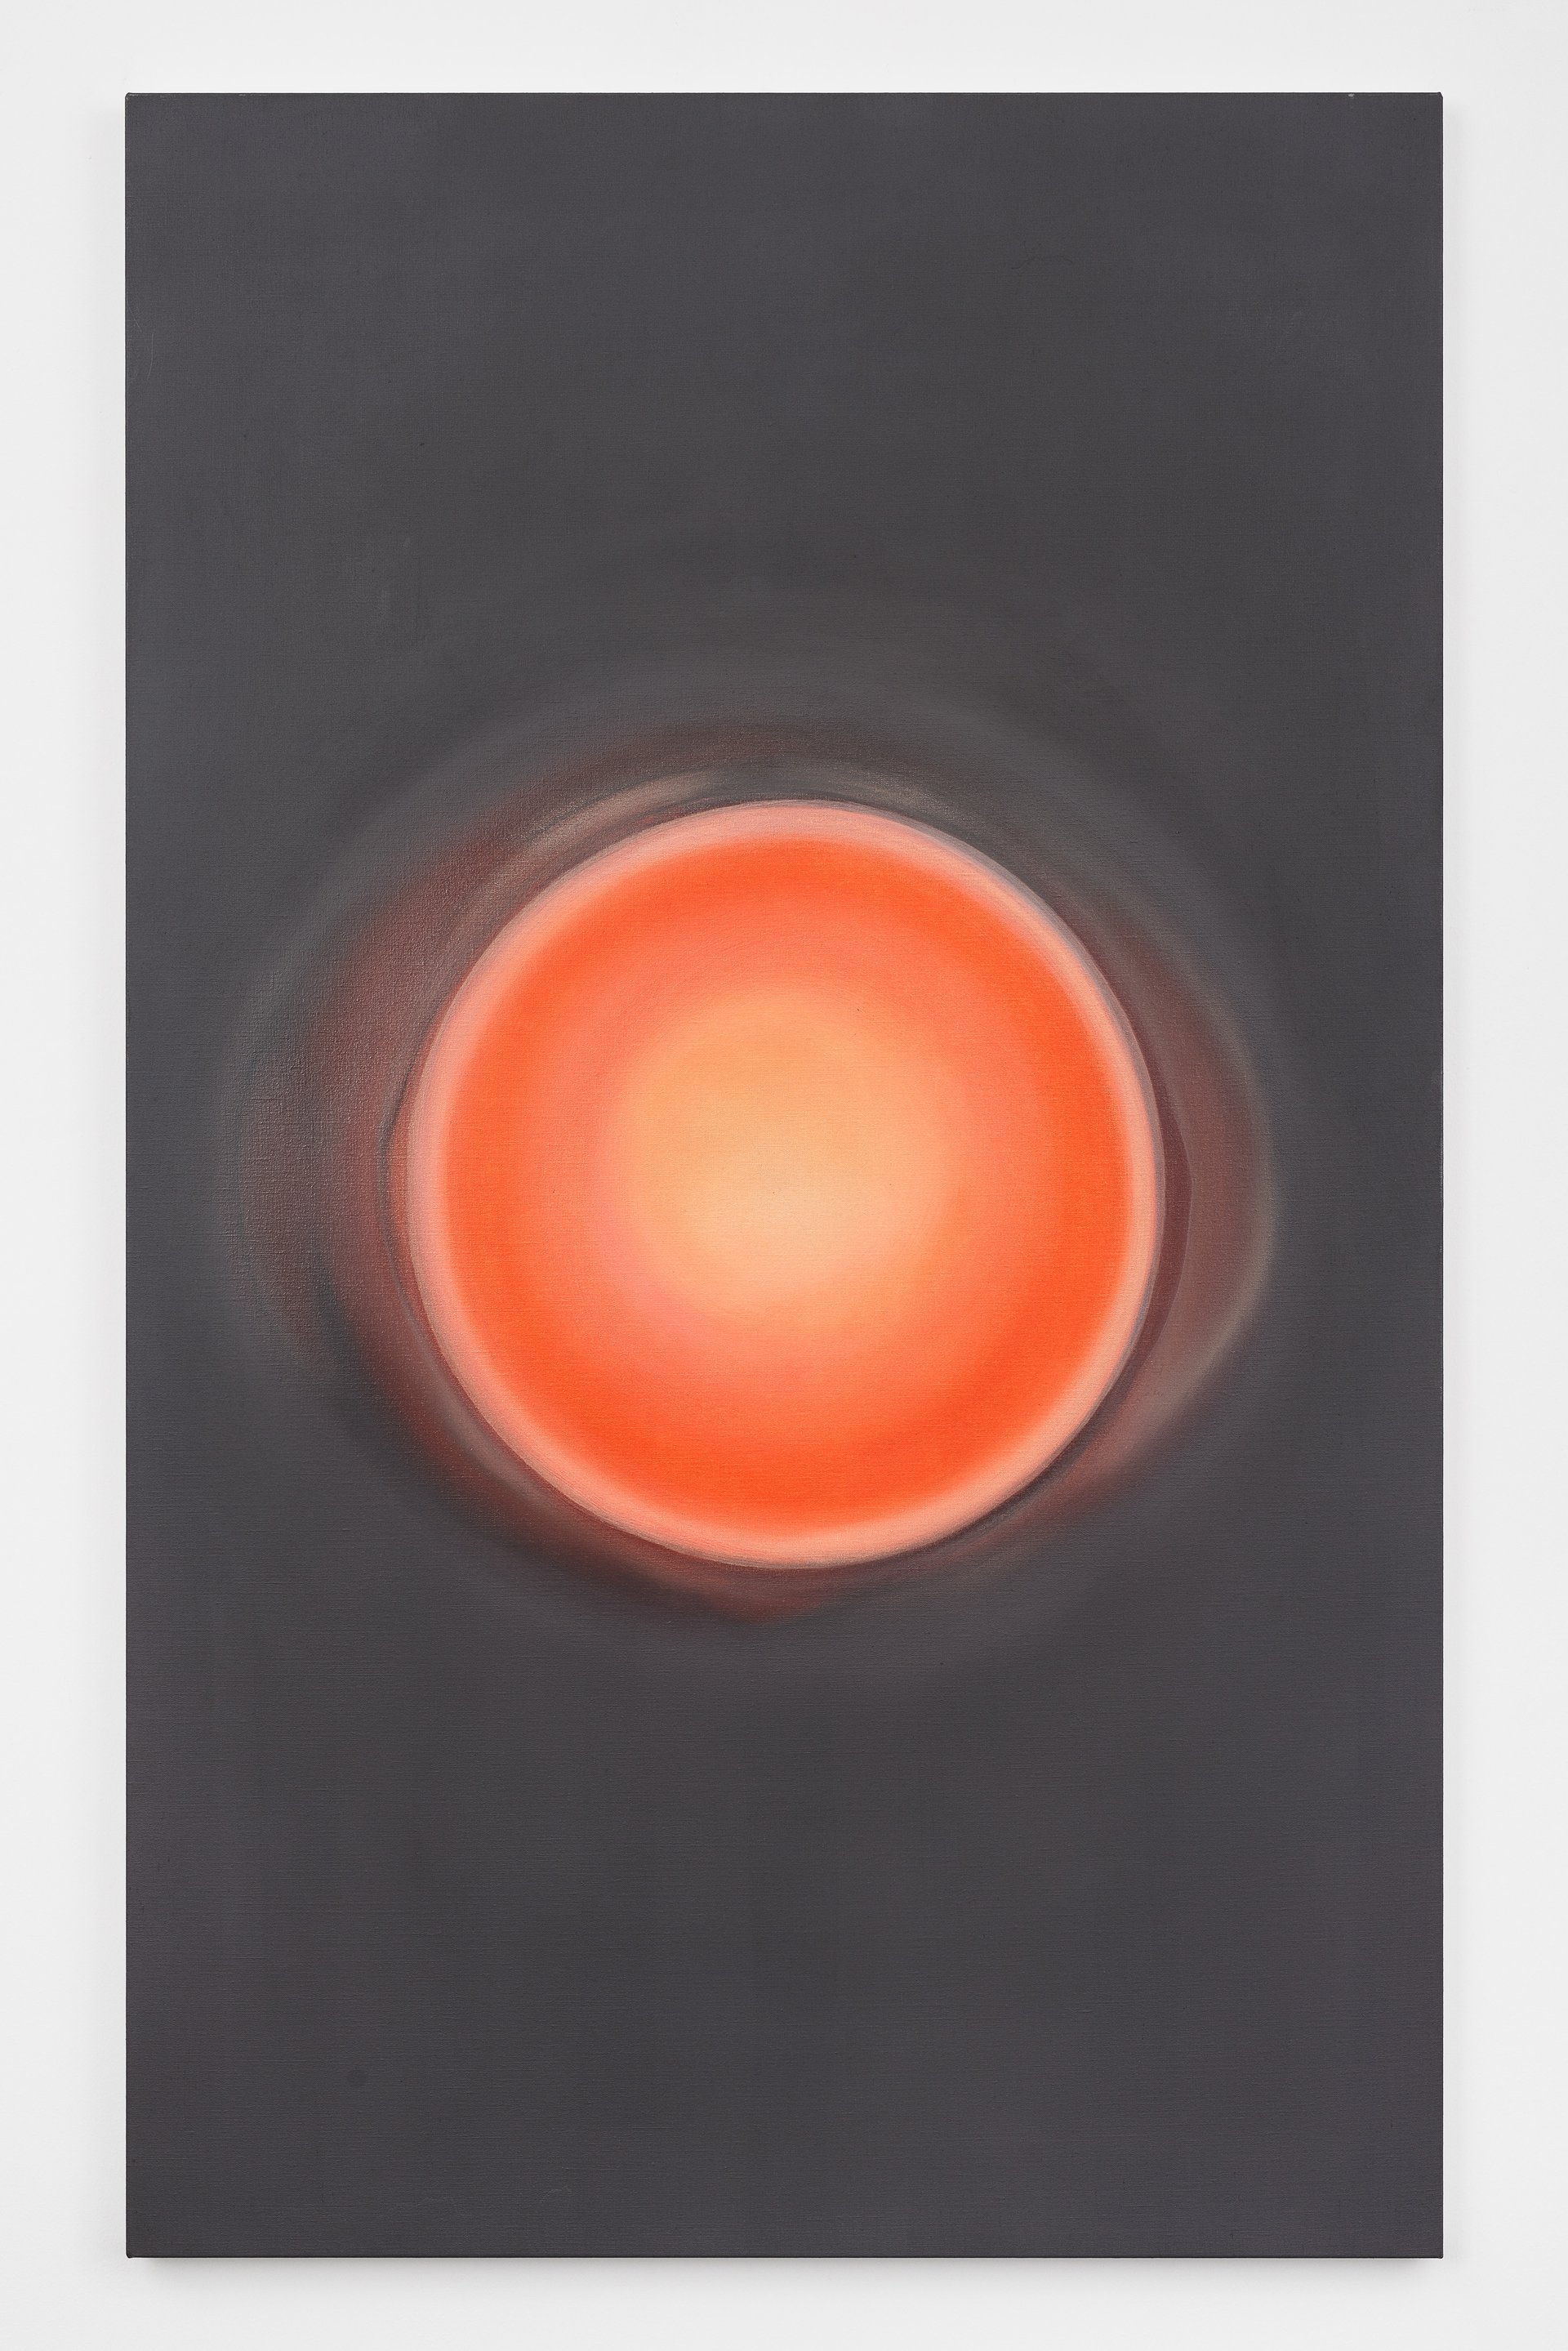 Evelyn PlaschgBig cold disc, 2023Oil on canvas165 x 100 cm